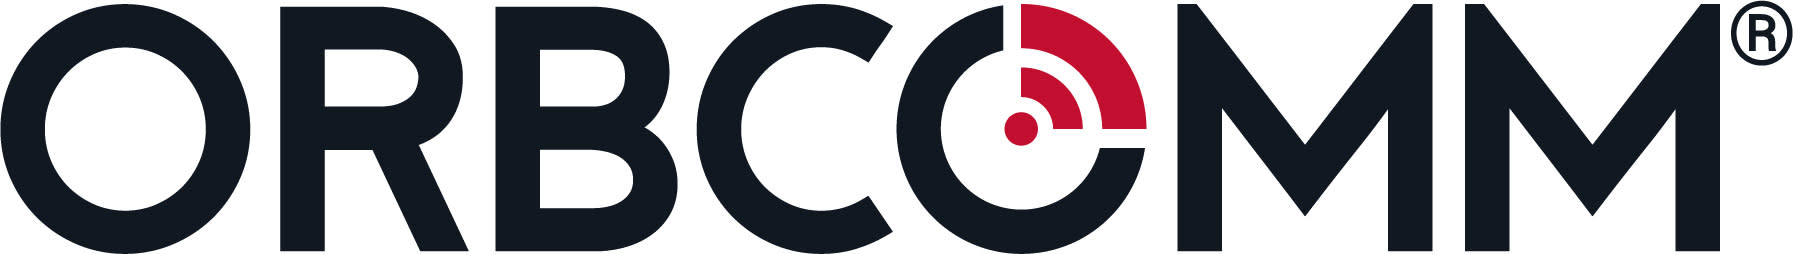 ORBCOMM to Participate at the Truist Securities 2021 Technology, Internet and Services Conference